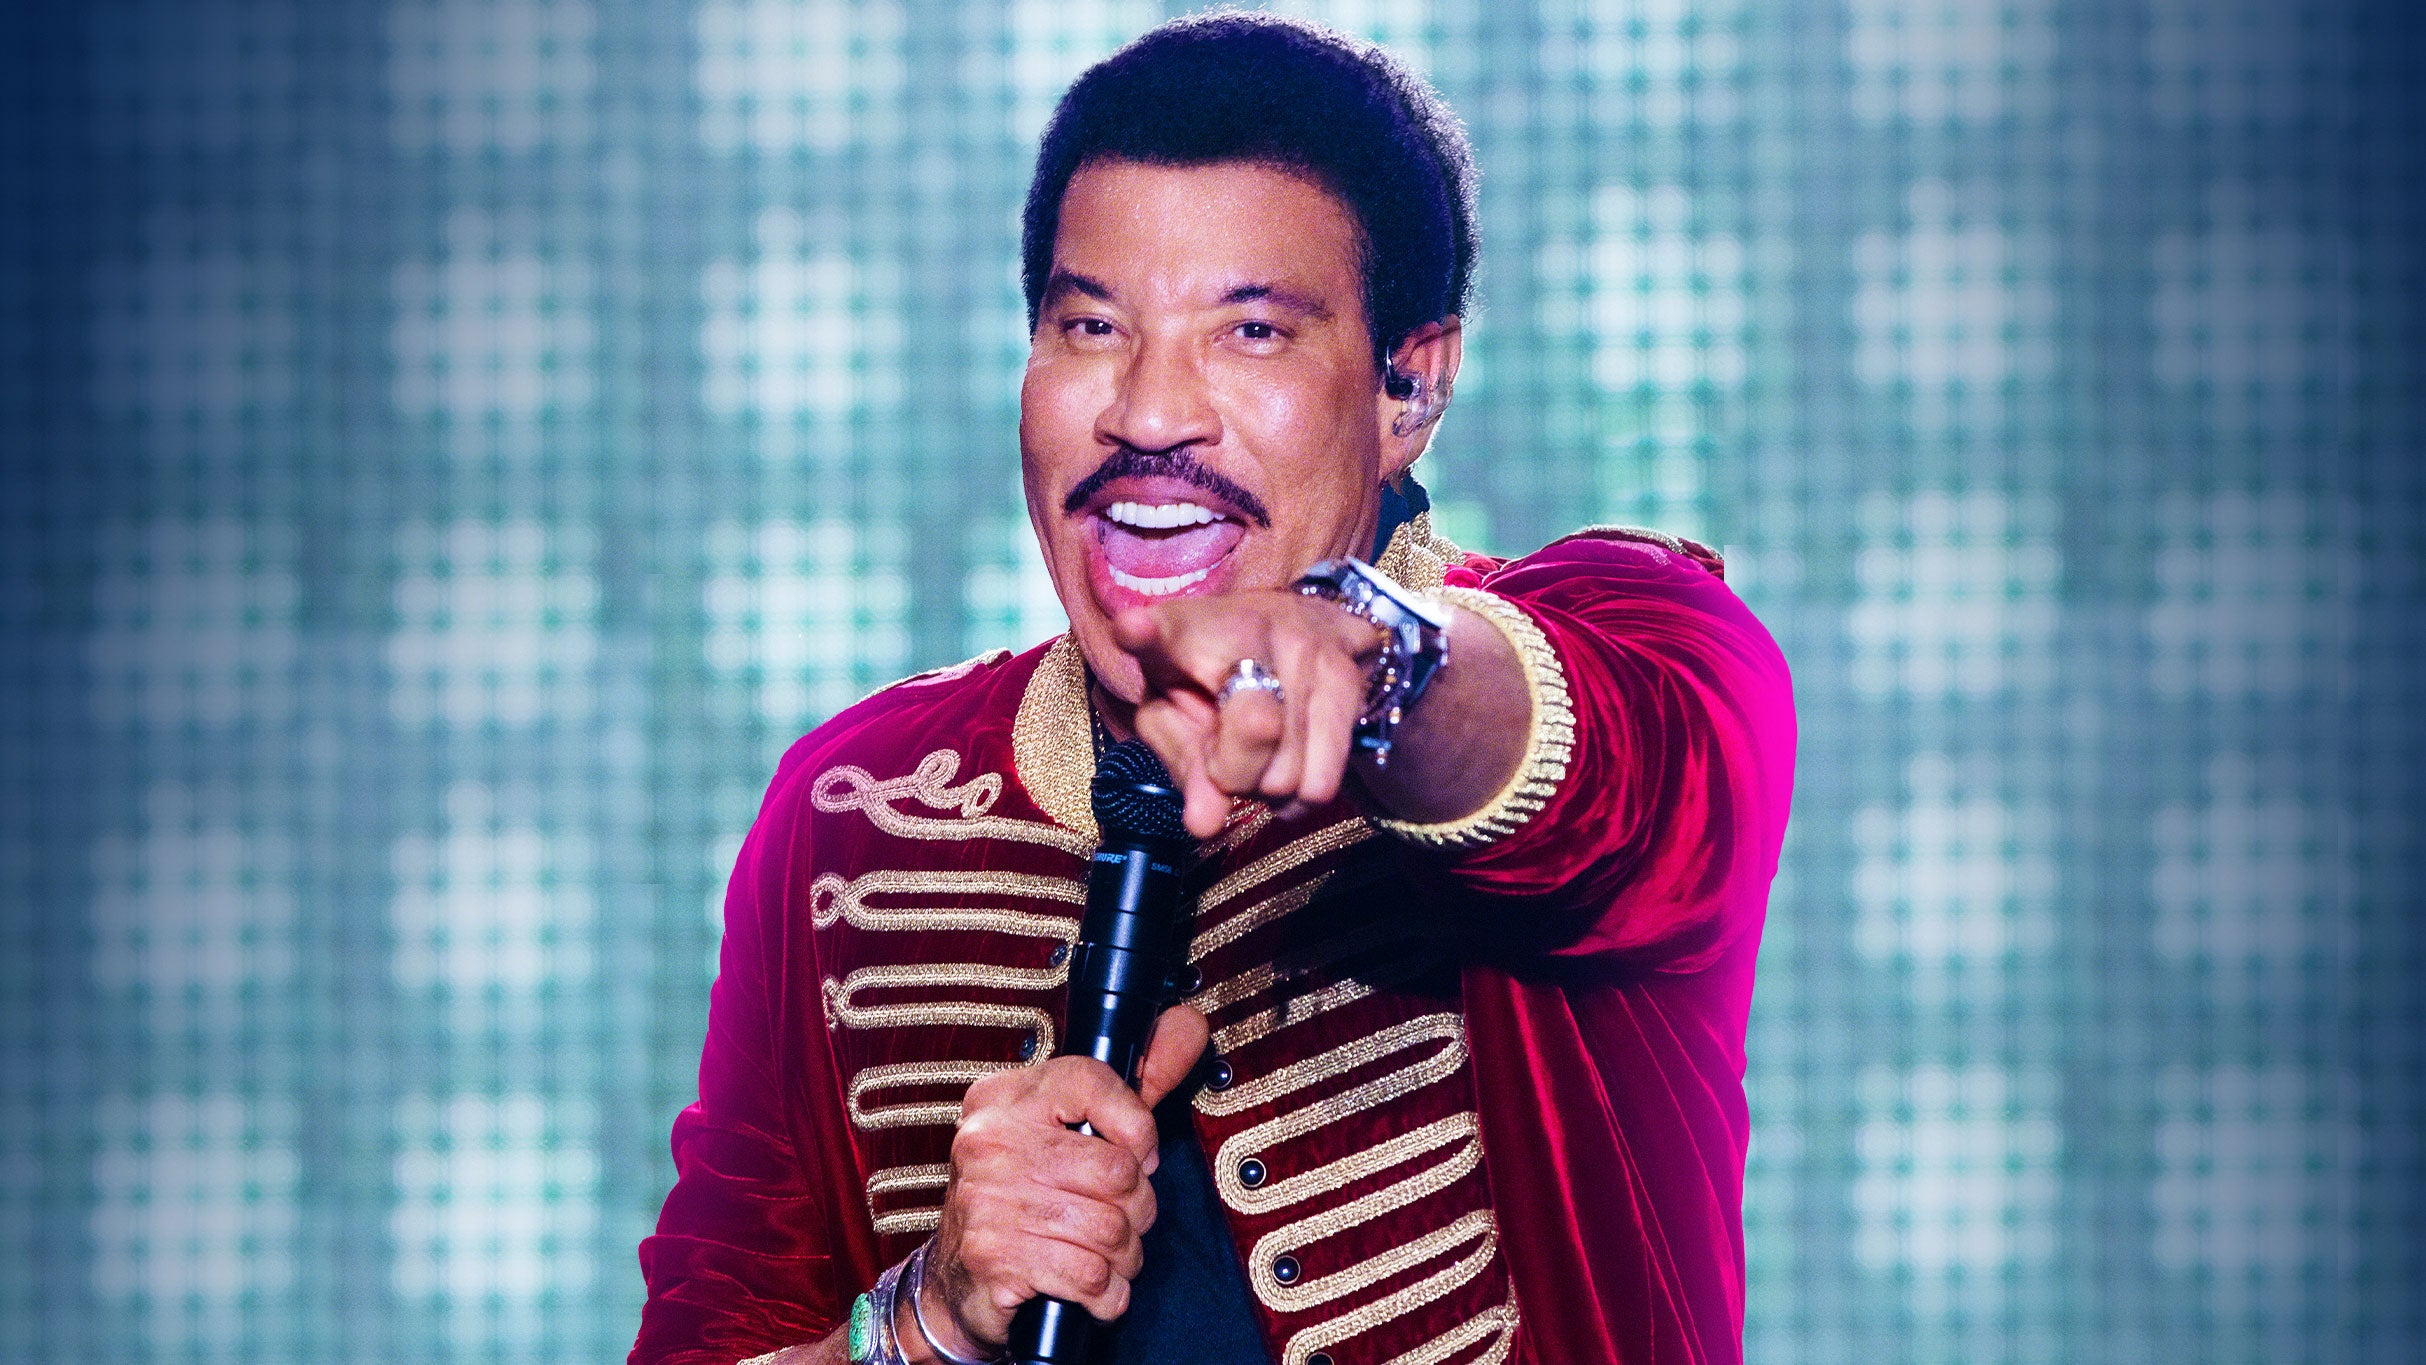 Lionel Richie And Earth, Wind & Fire - Sing A Song All Night Long free pre-sale code for early tickets in San Francisco